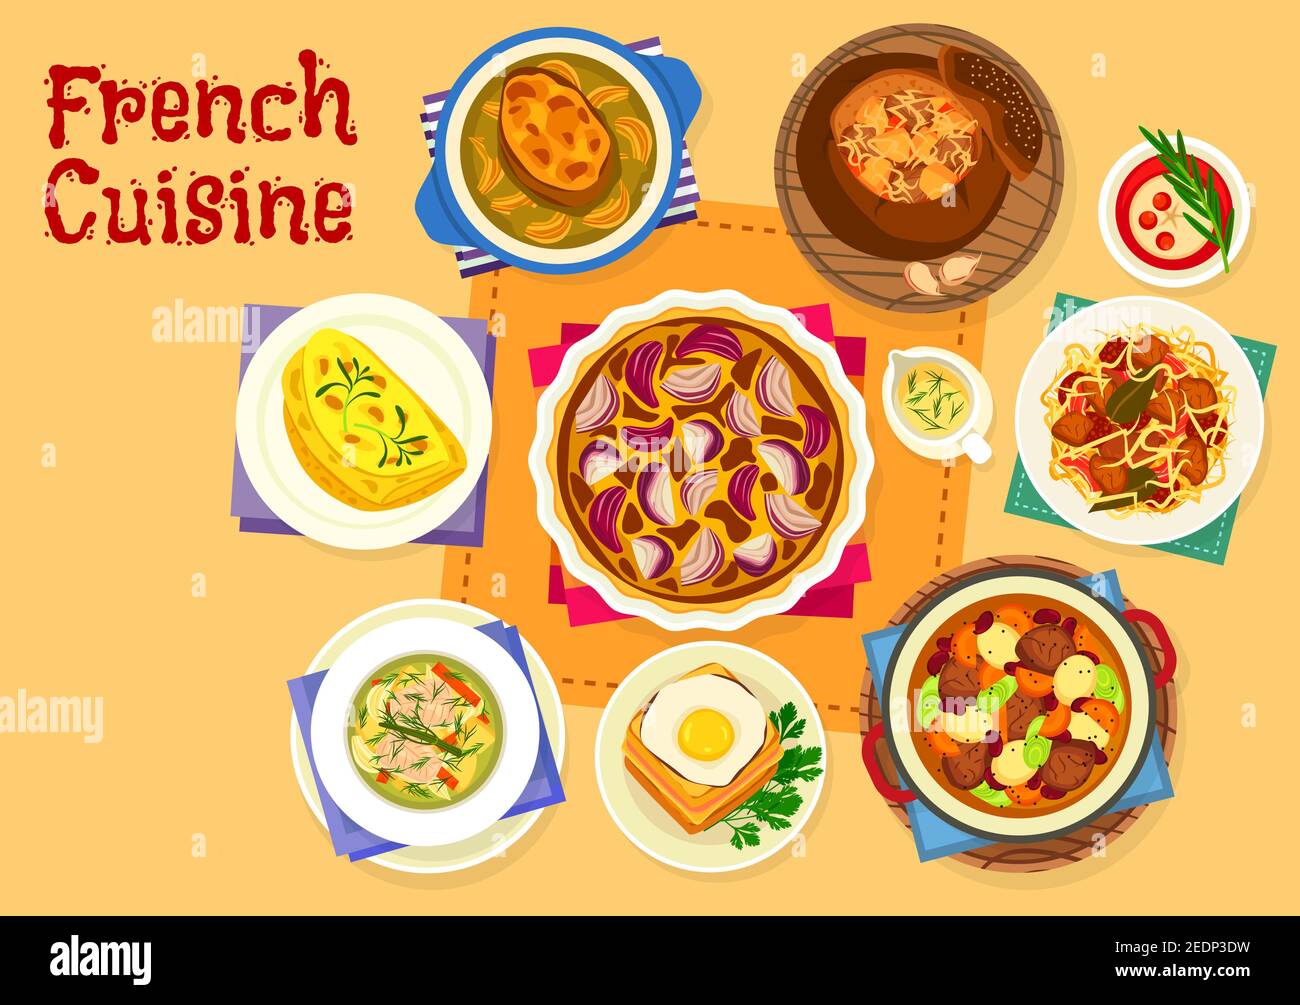 French cuisine healthy food icon of cheese ham toast with fried egg, onion cream soup, seafood stew, cabbage soup in rye bread bowl, cabbage pork stew Stock Vector